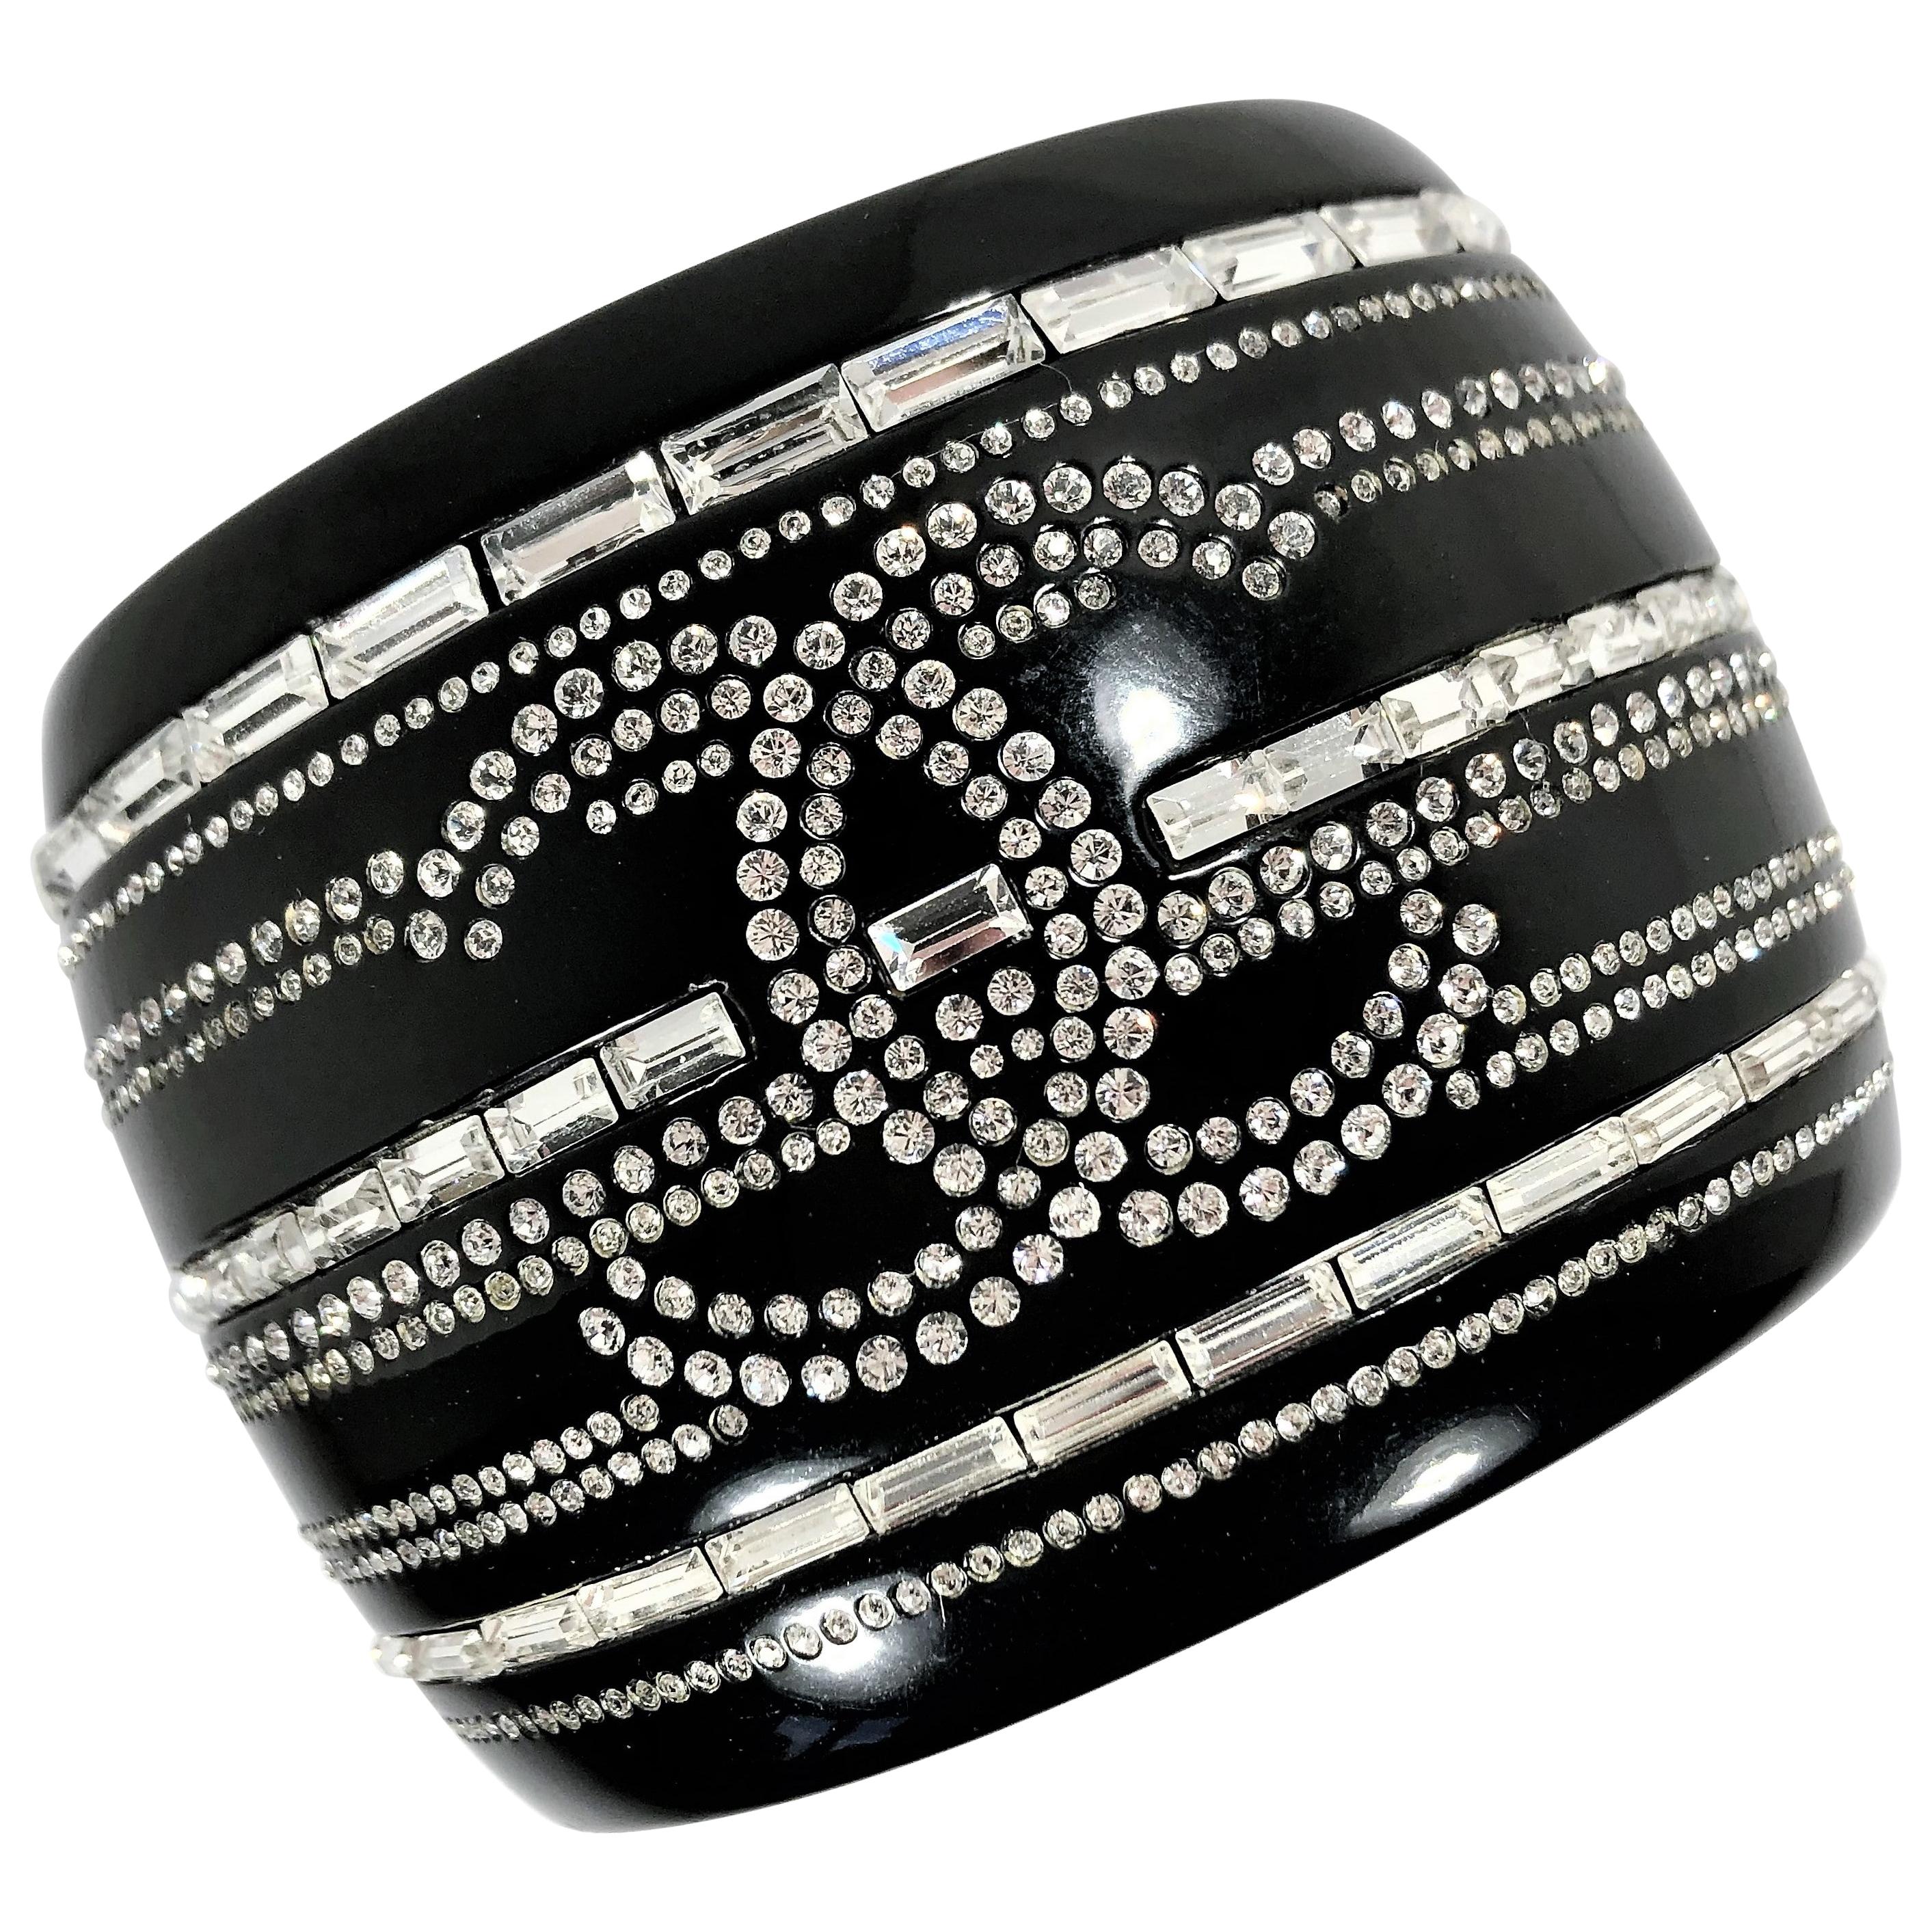 Major Chanel Black Resin Cuff with Rhinestones from the 2009 Cruise Collection